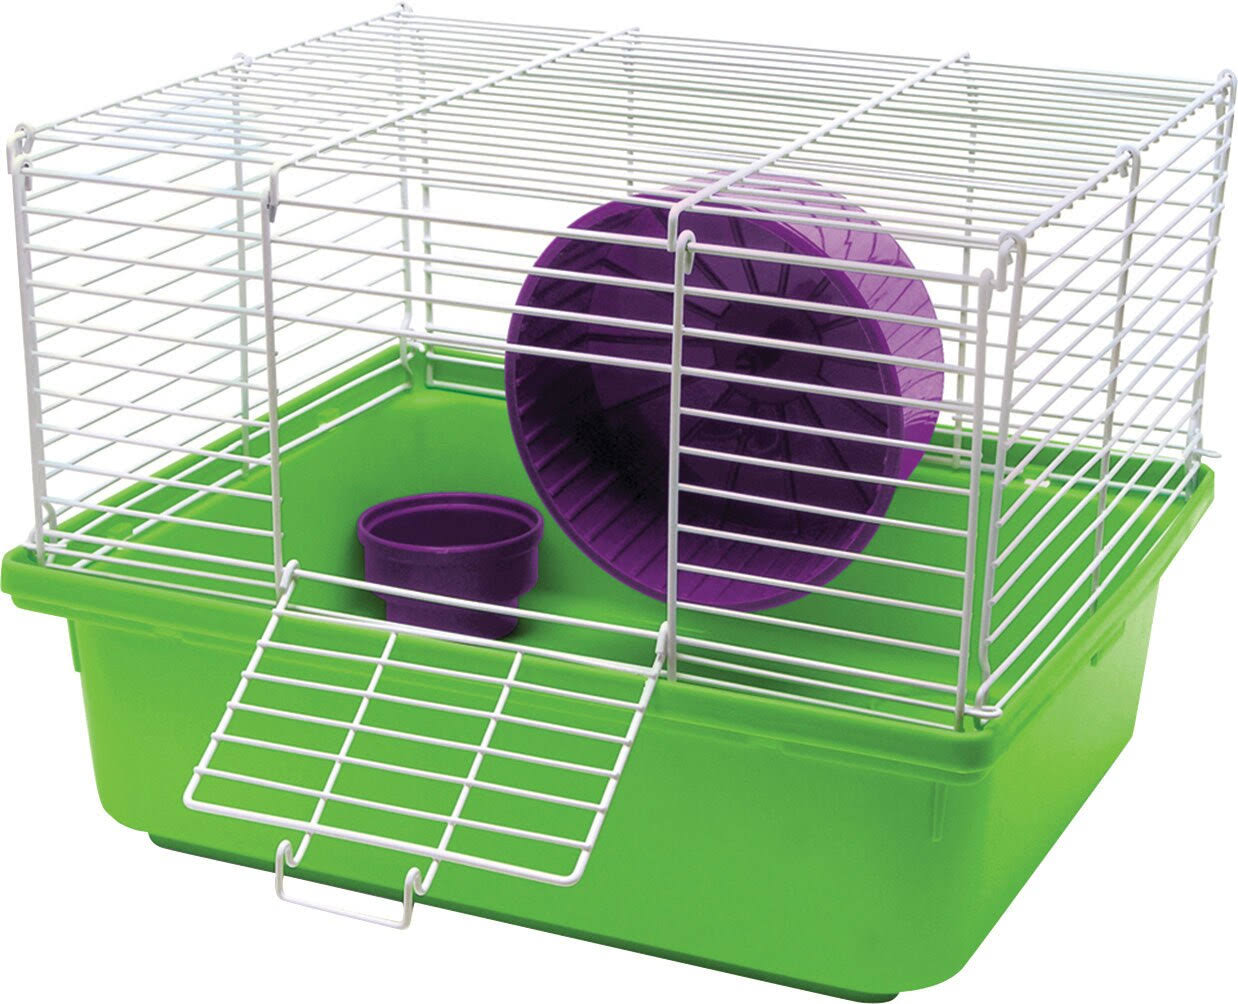 Super Pet- Container - My First Hamster Home 1-story Unassembled